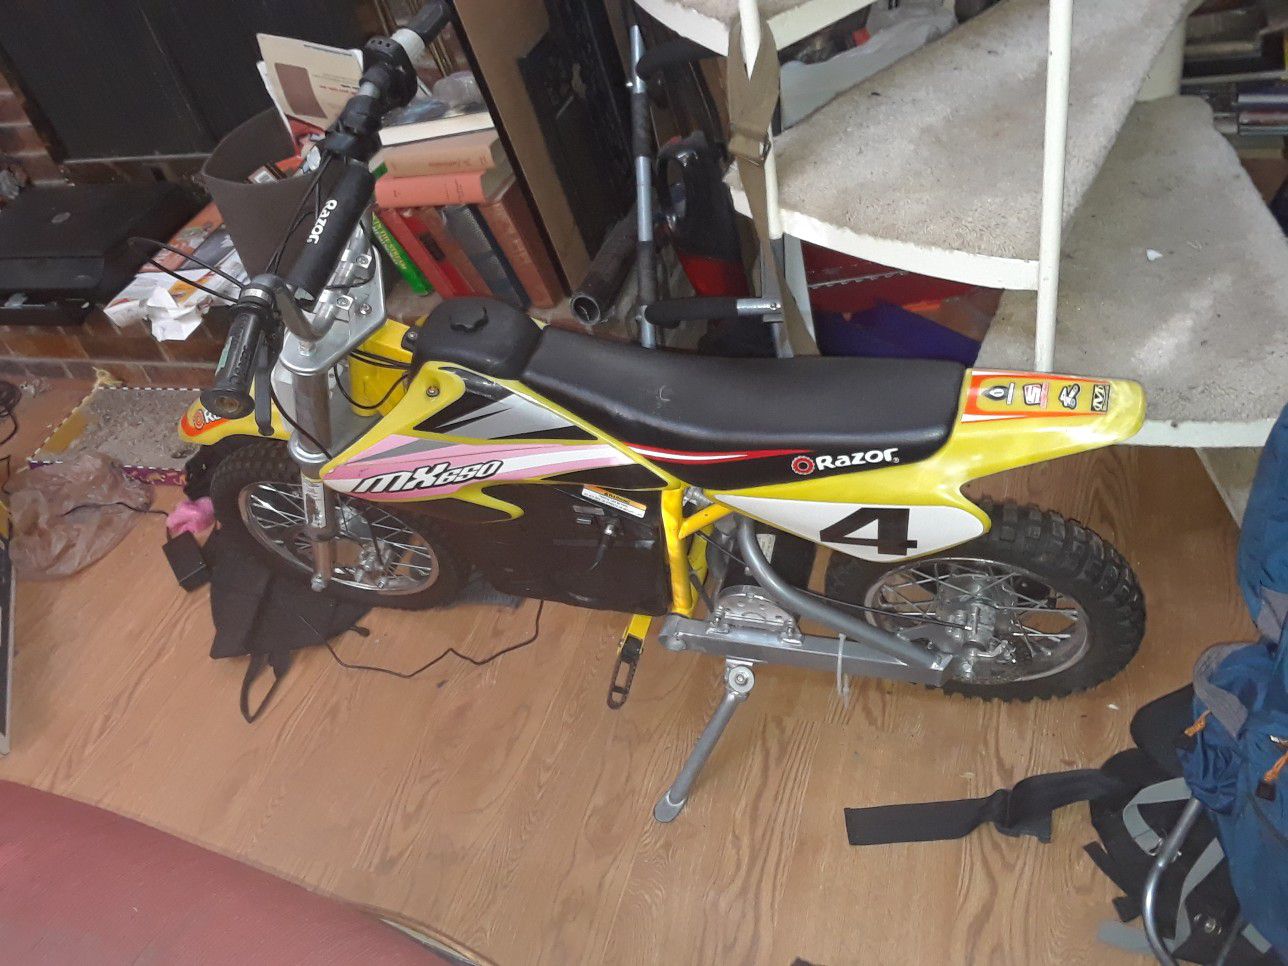 RAZOR MOTORCYCLE MX650 36VOLT/17mph/ 220lb max/ comes with helmet and 36v charger.